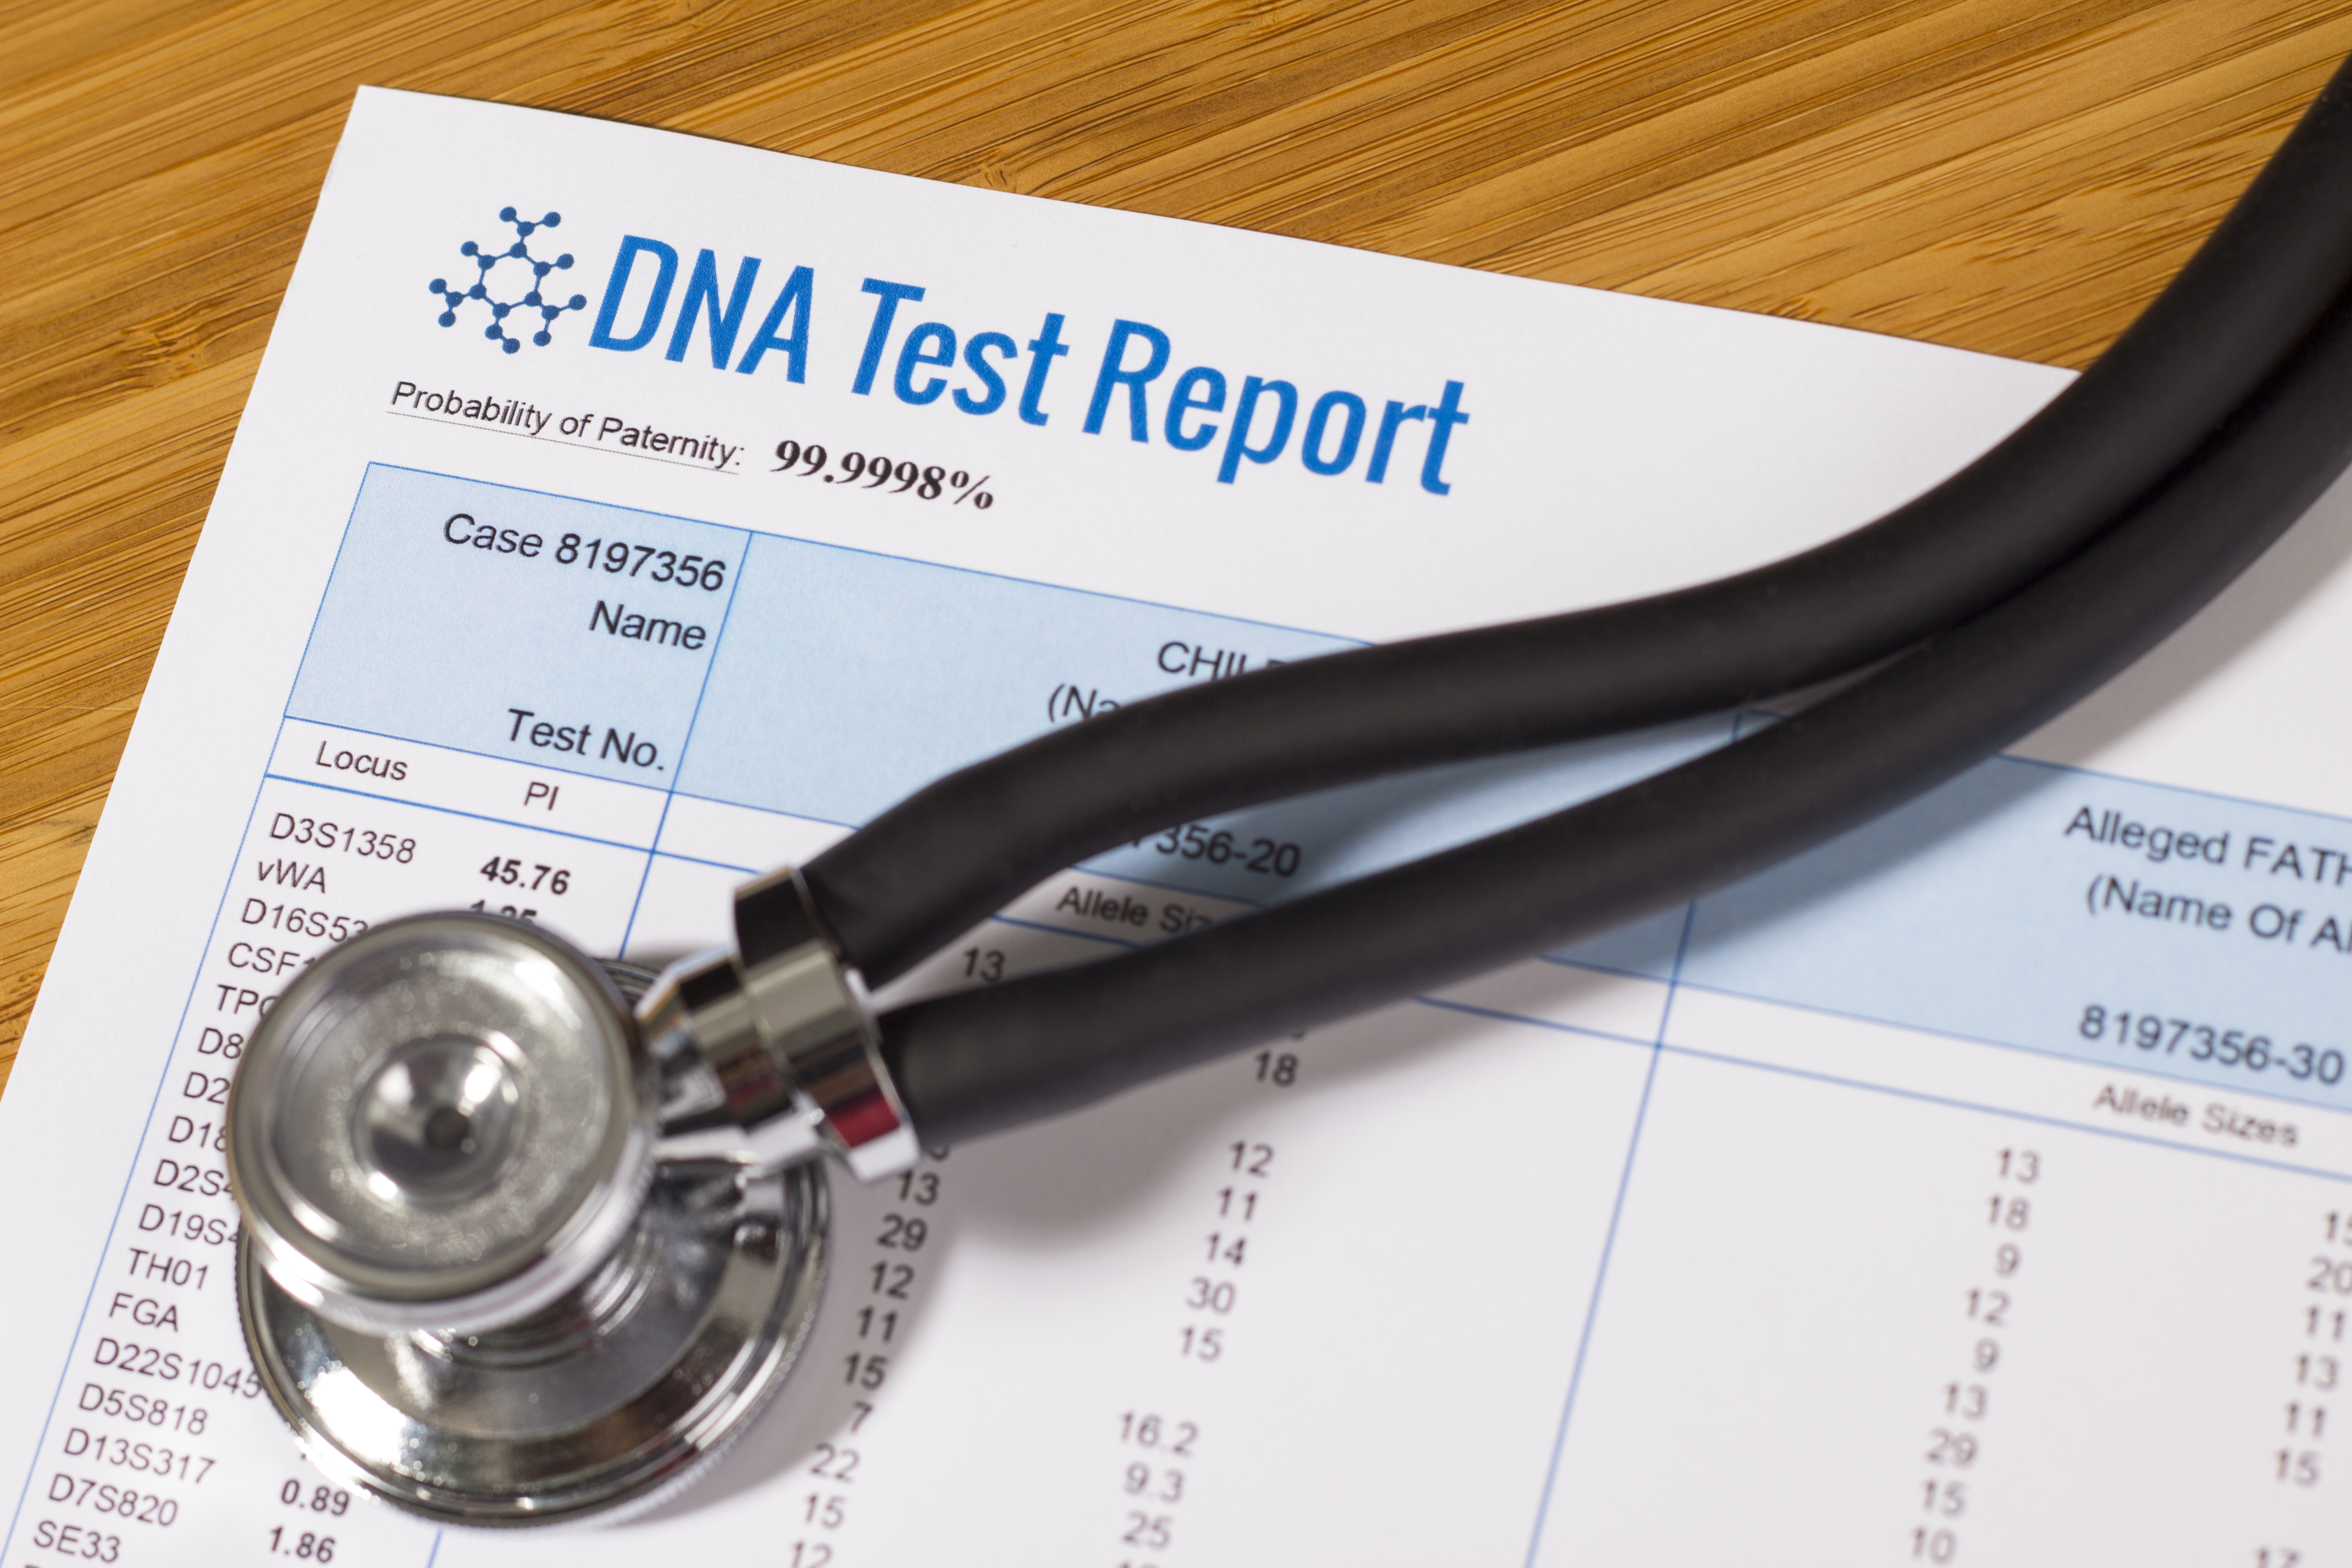 A DNA test kit and a stethoscope | Source: Pexels